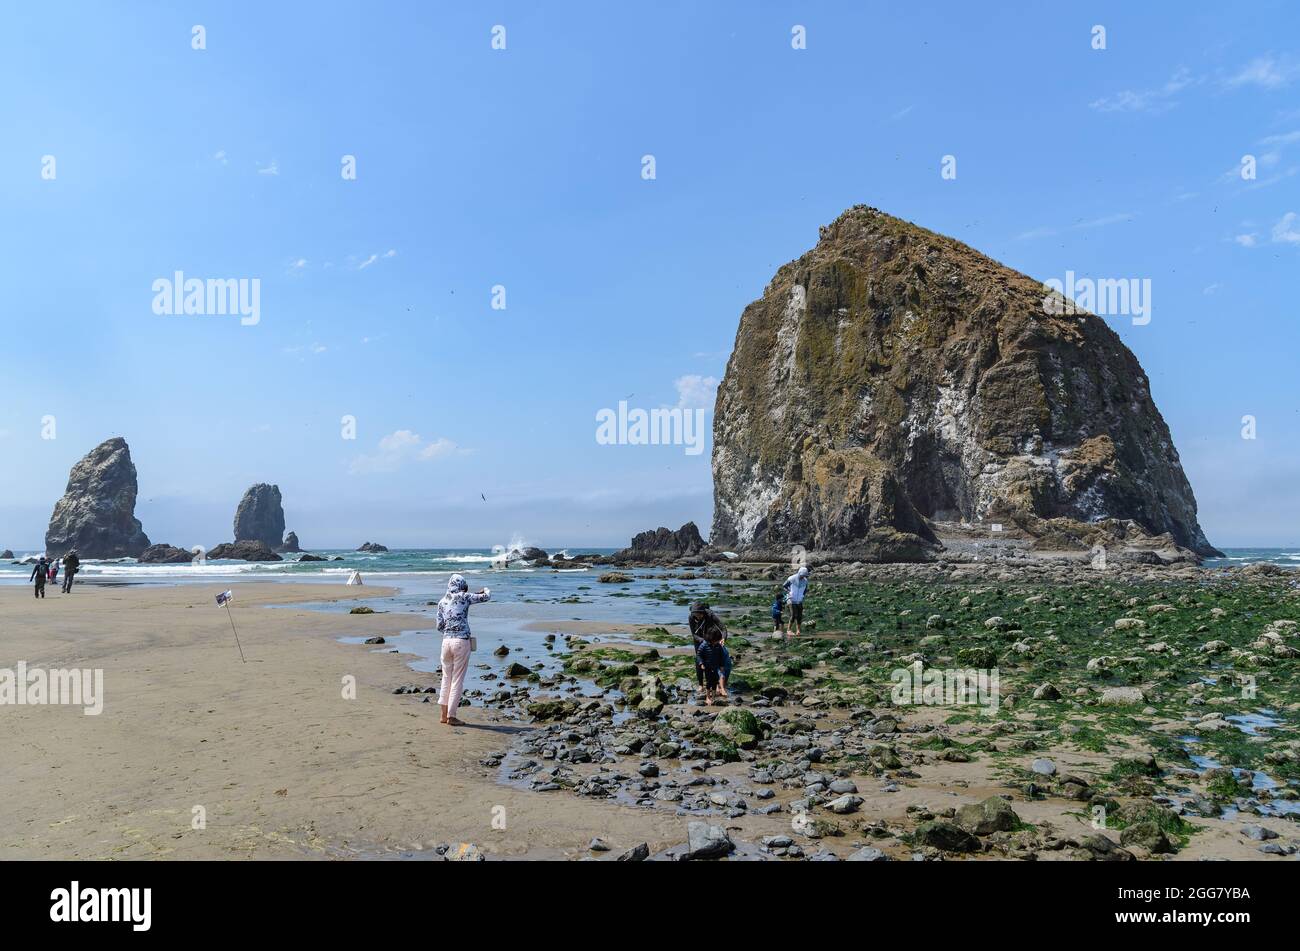 Family with small kid playing in front of Haystack Rock at the Cannon Beach, Oregon, USA. Stock Photo